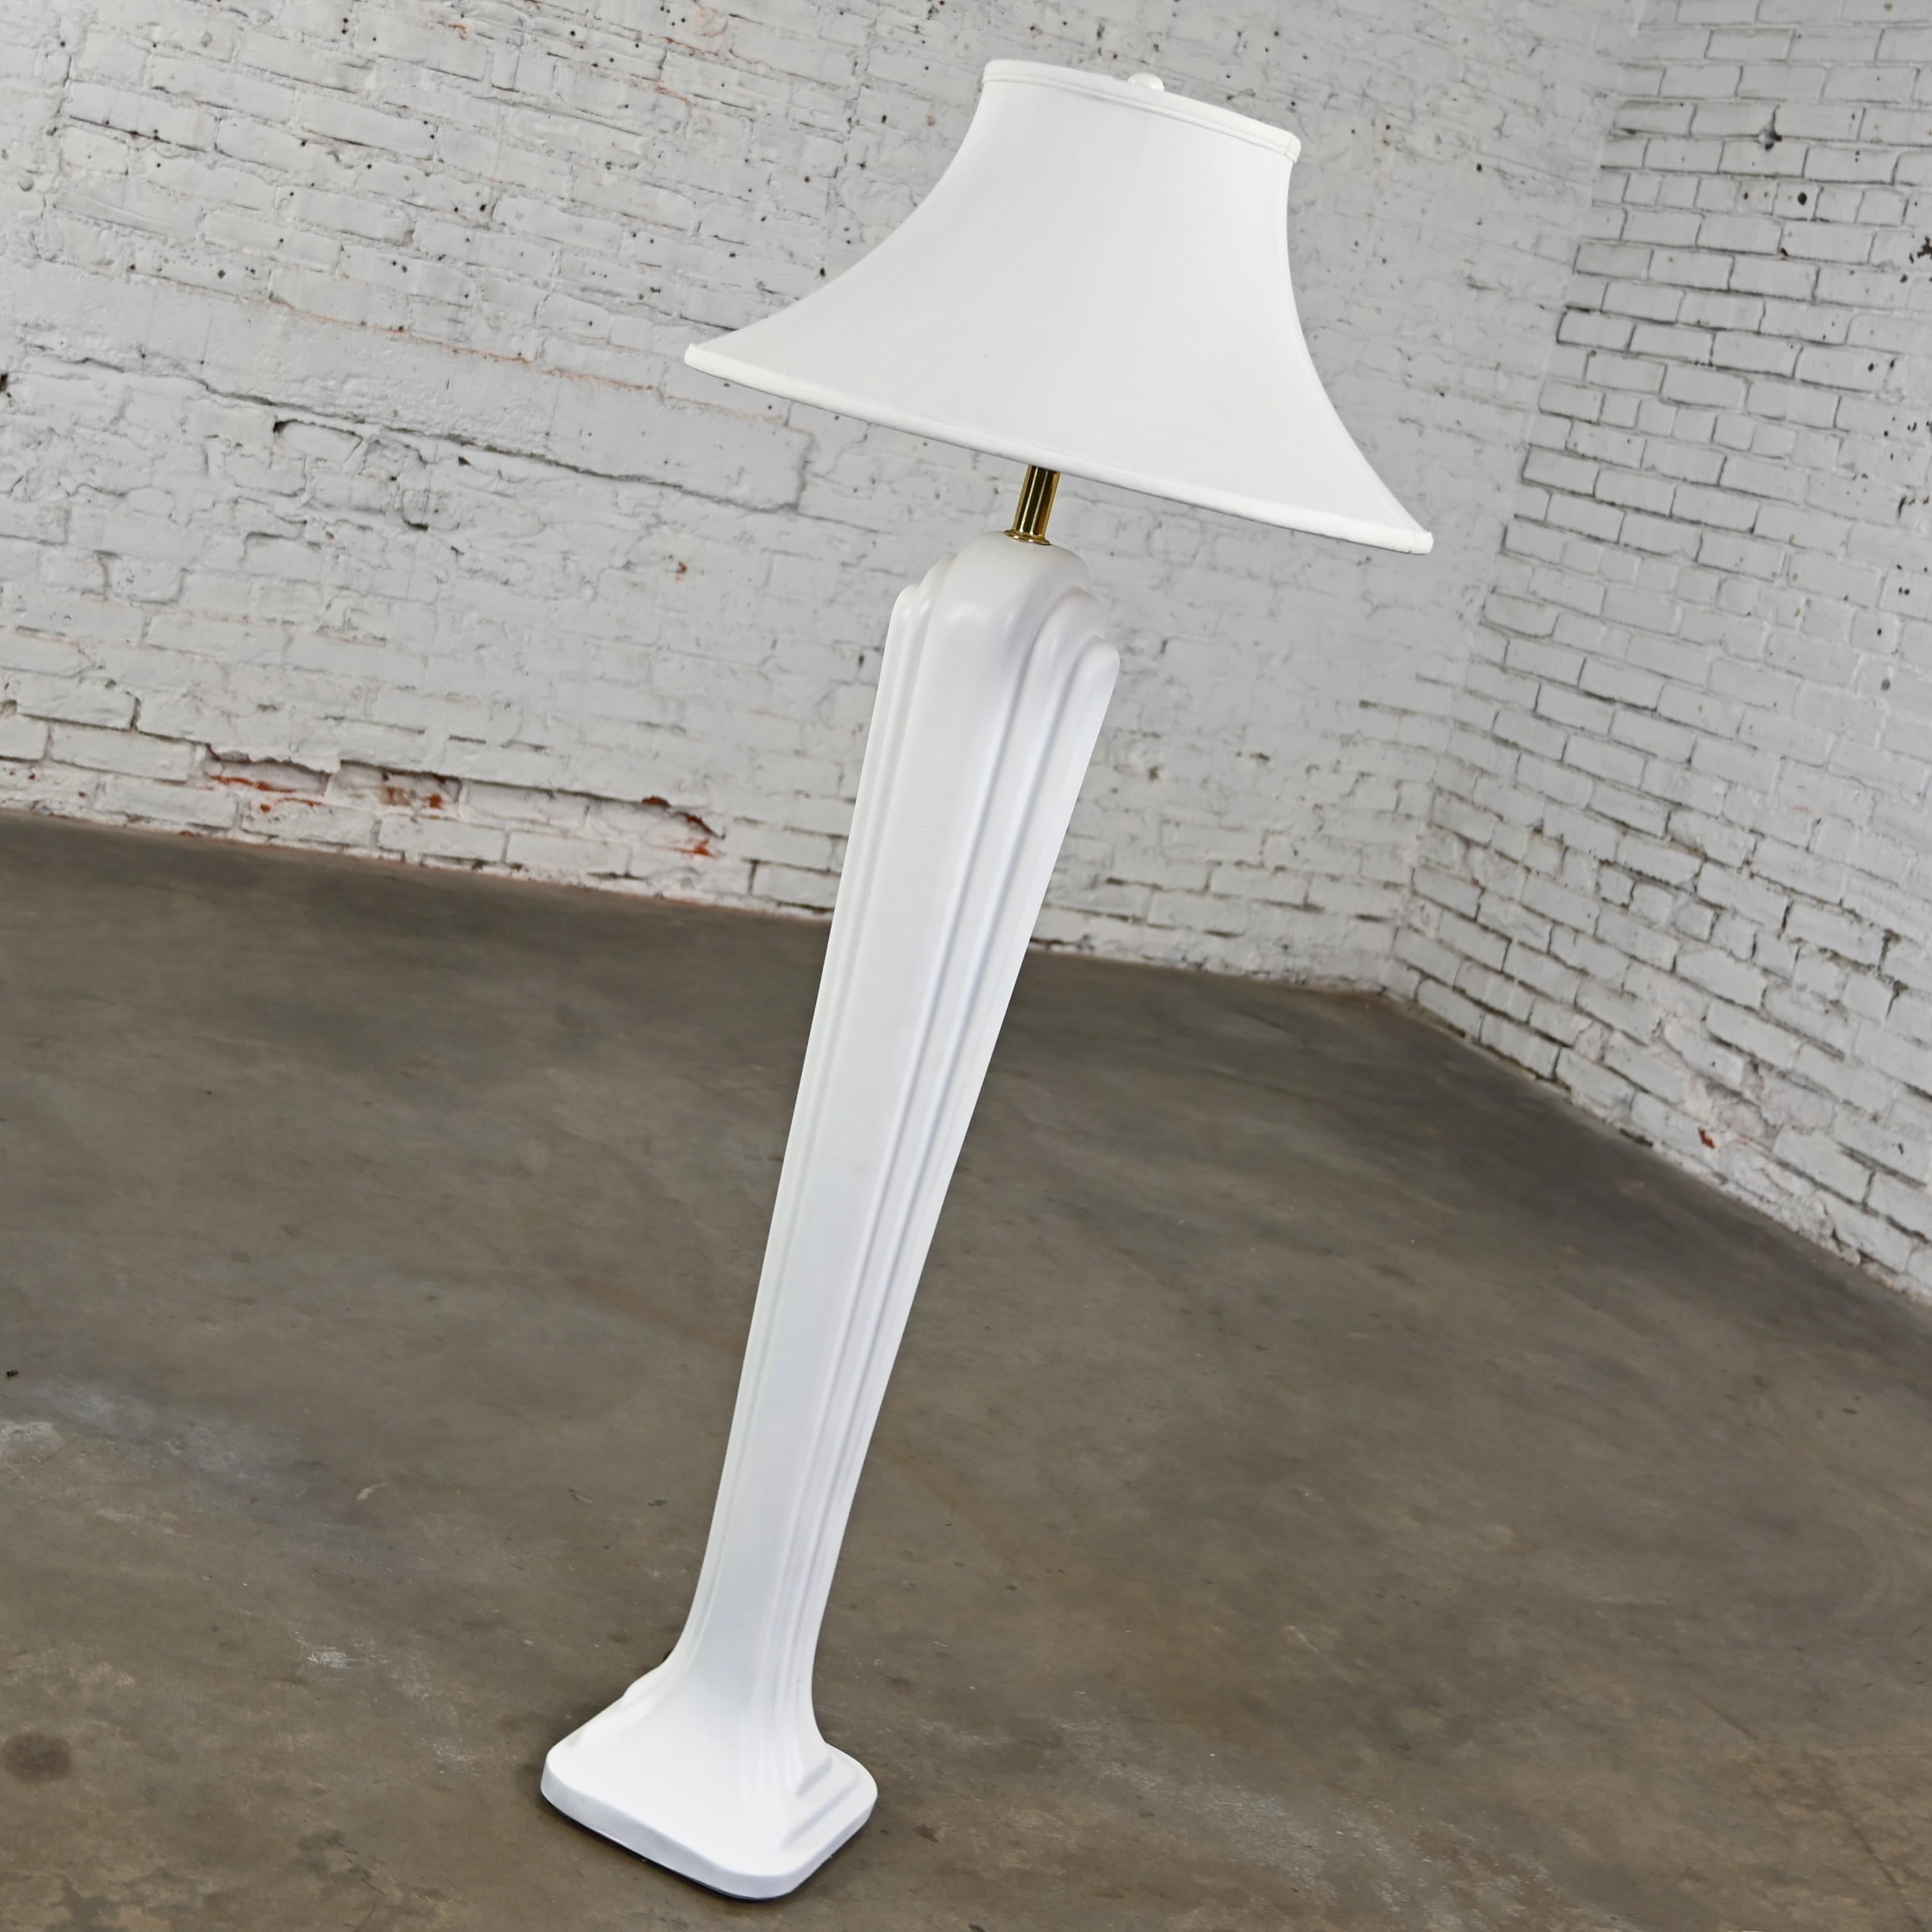 Italian Art Deco Revival to Postmodern Paolo Gucci Floor Lamp White Sculpted Resin  For Sale